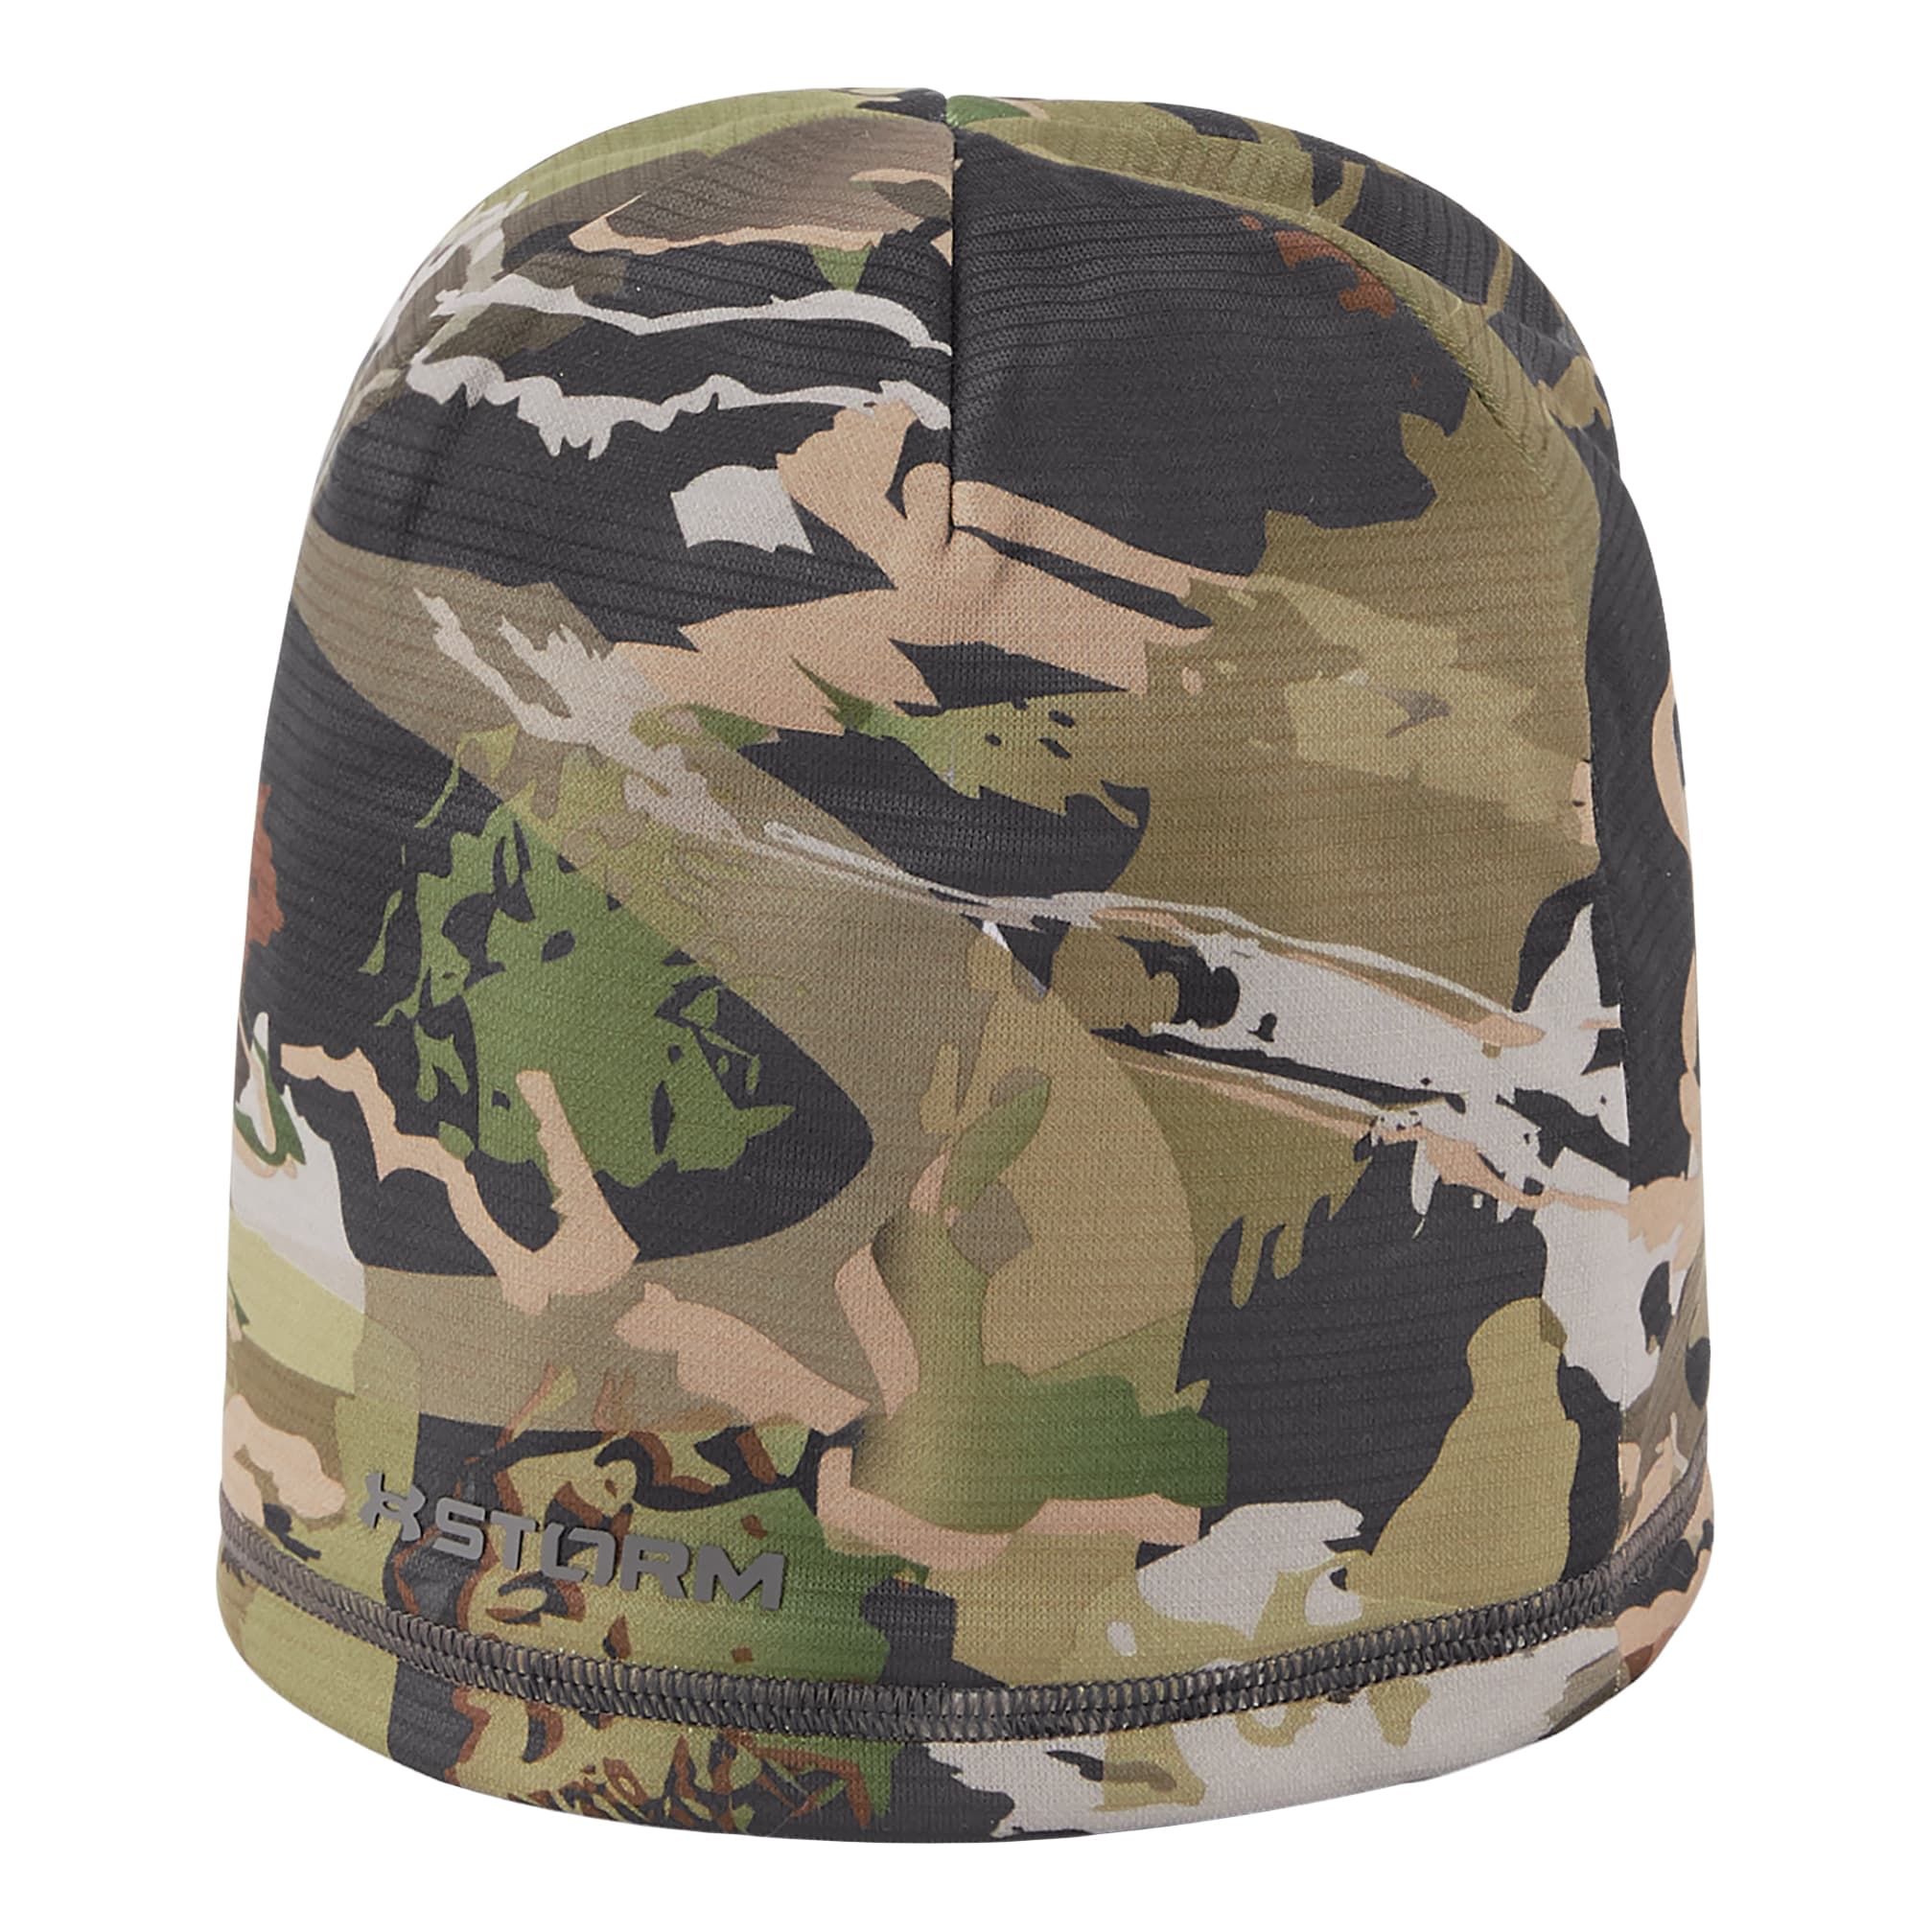 Under Armour® Youth Scent Control Storm Fleece Beanie - Ridge Reaper Forest/Black